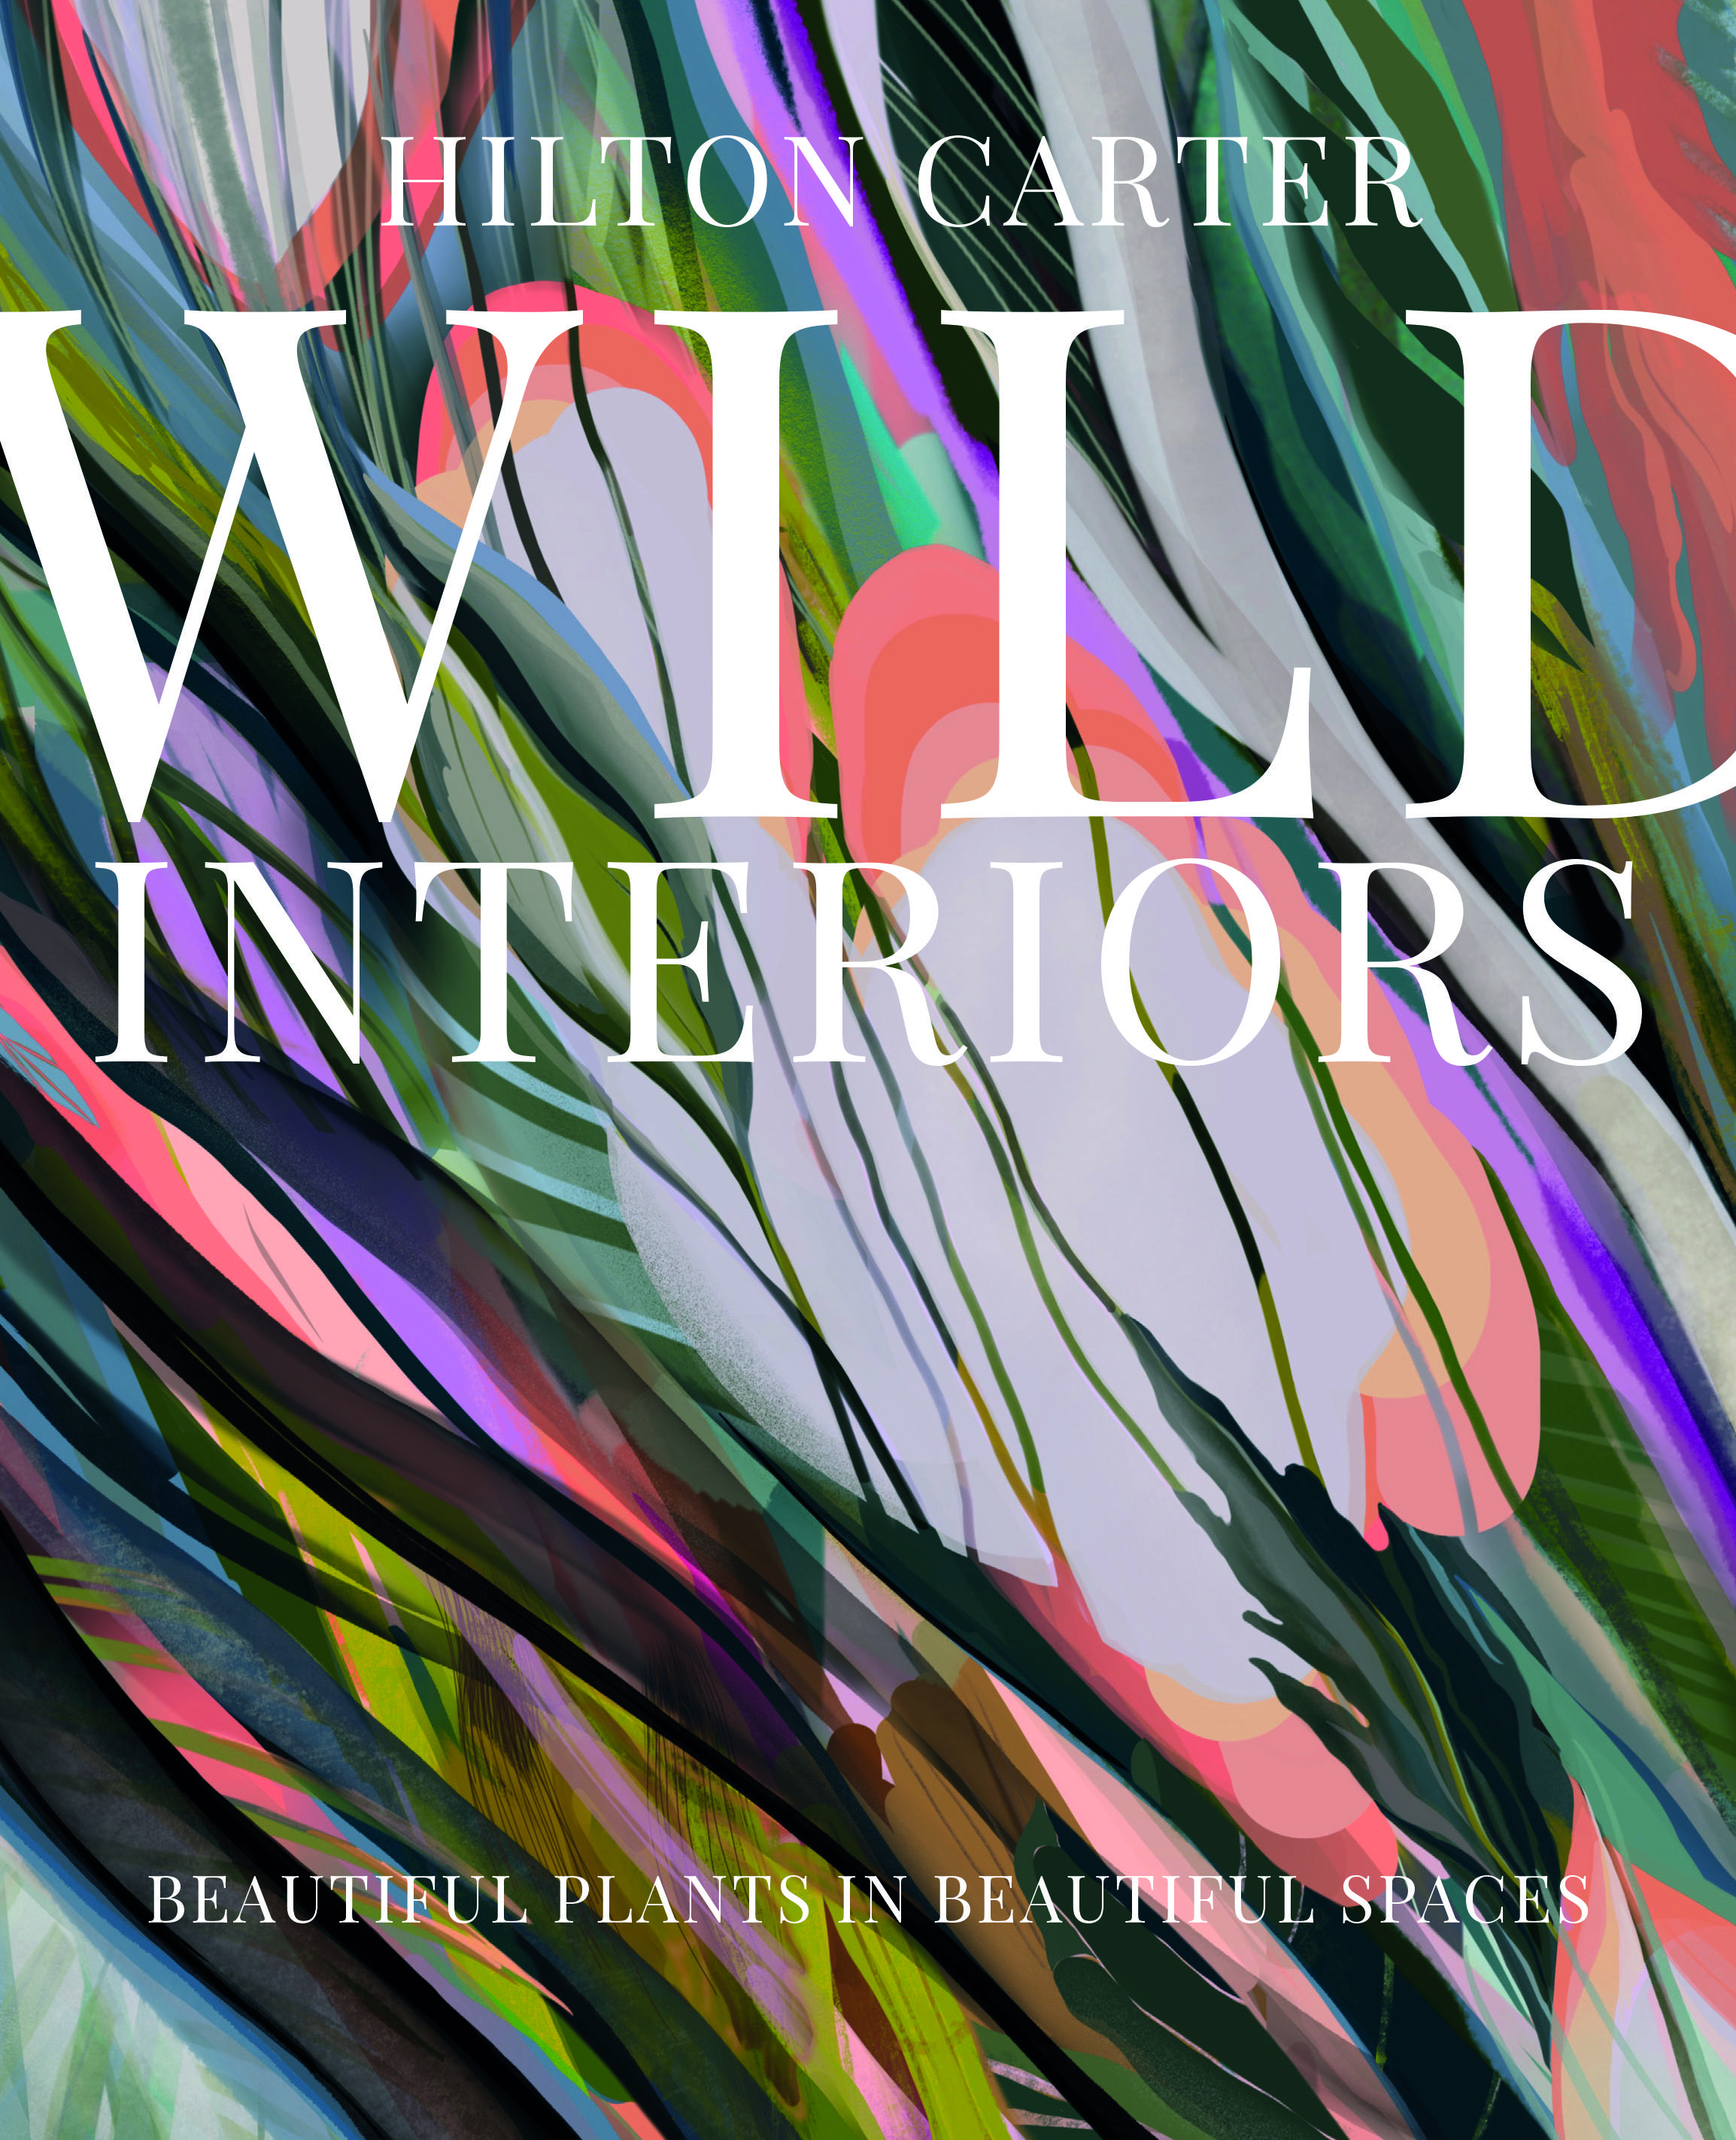 DC - The LINE - WILD INTERIORS Book Signing